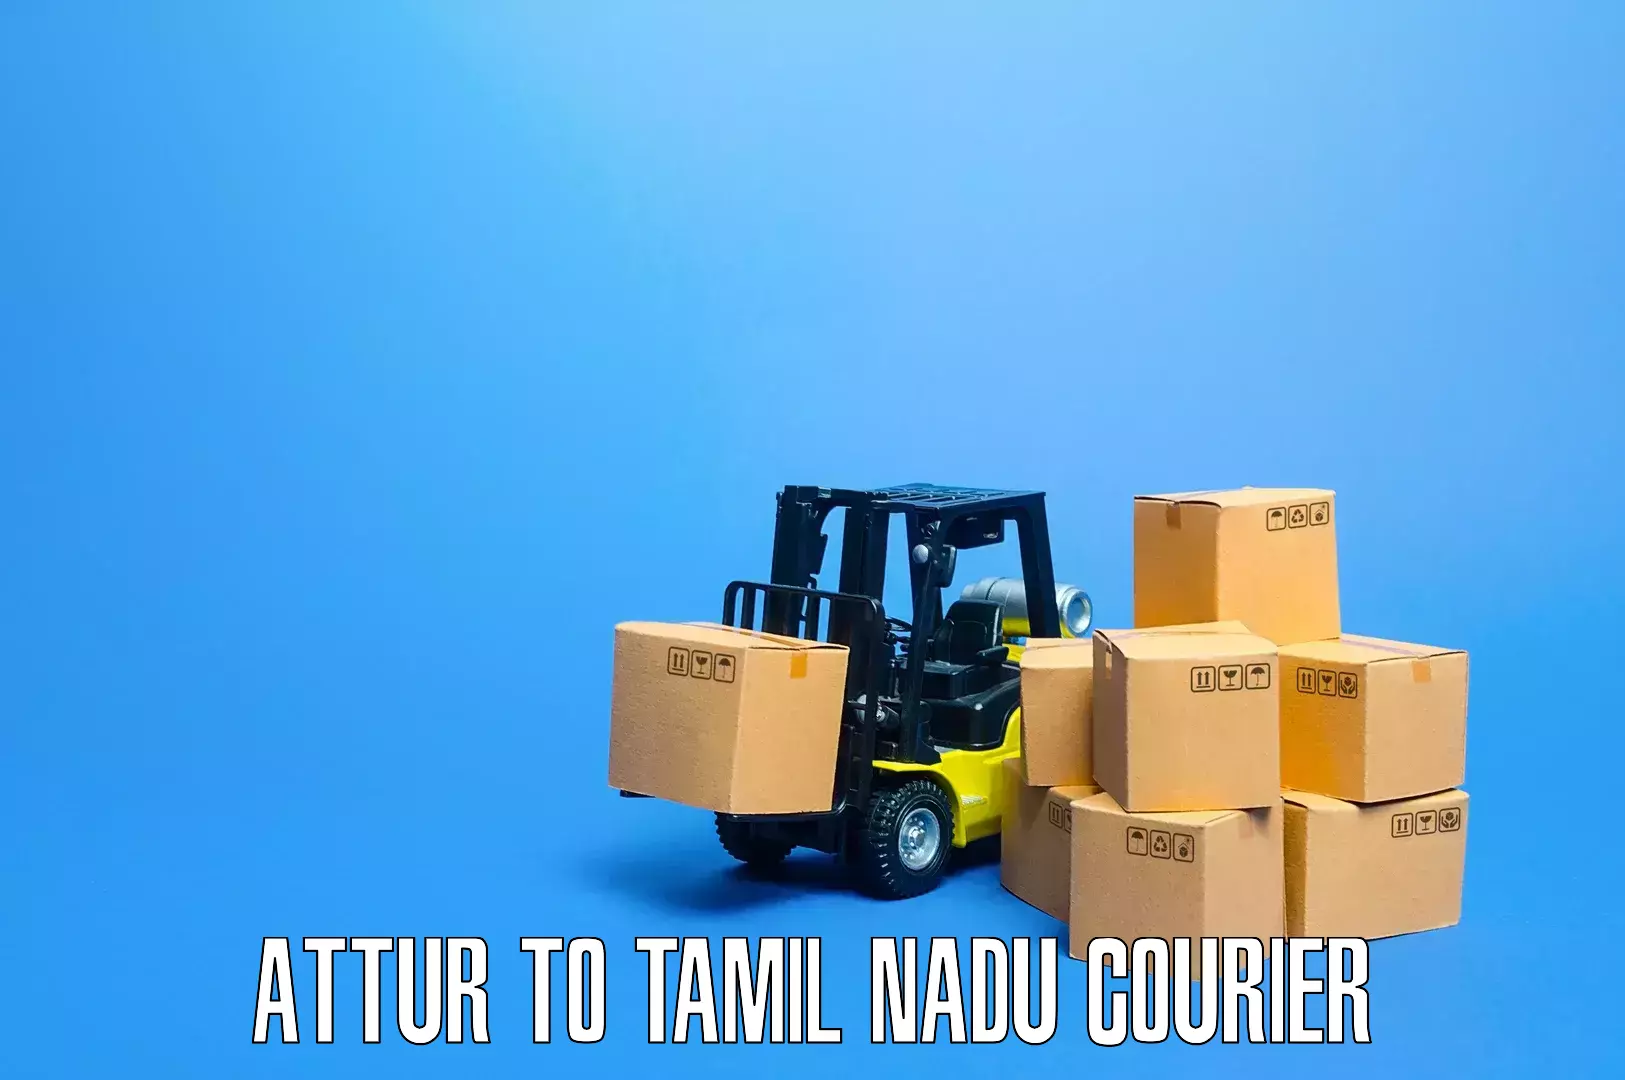 Furniture movers and packers Attur to Ennore Port Chennai